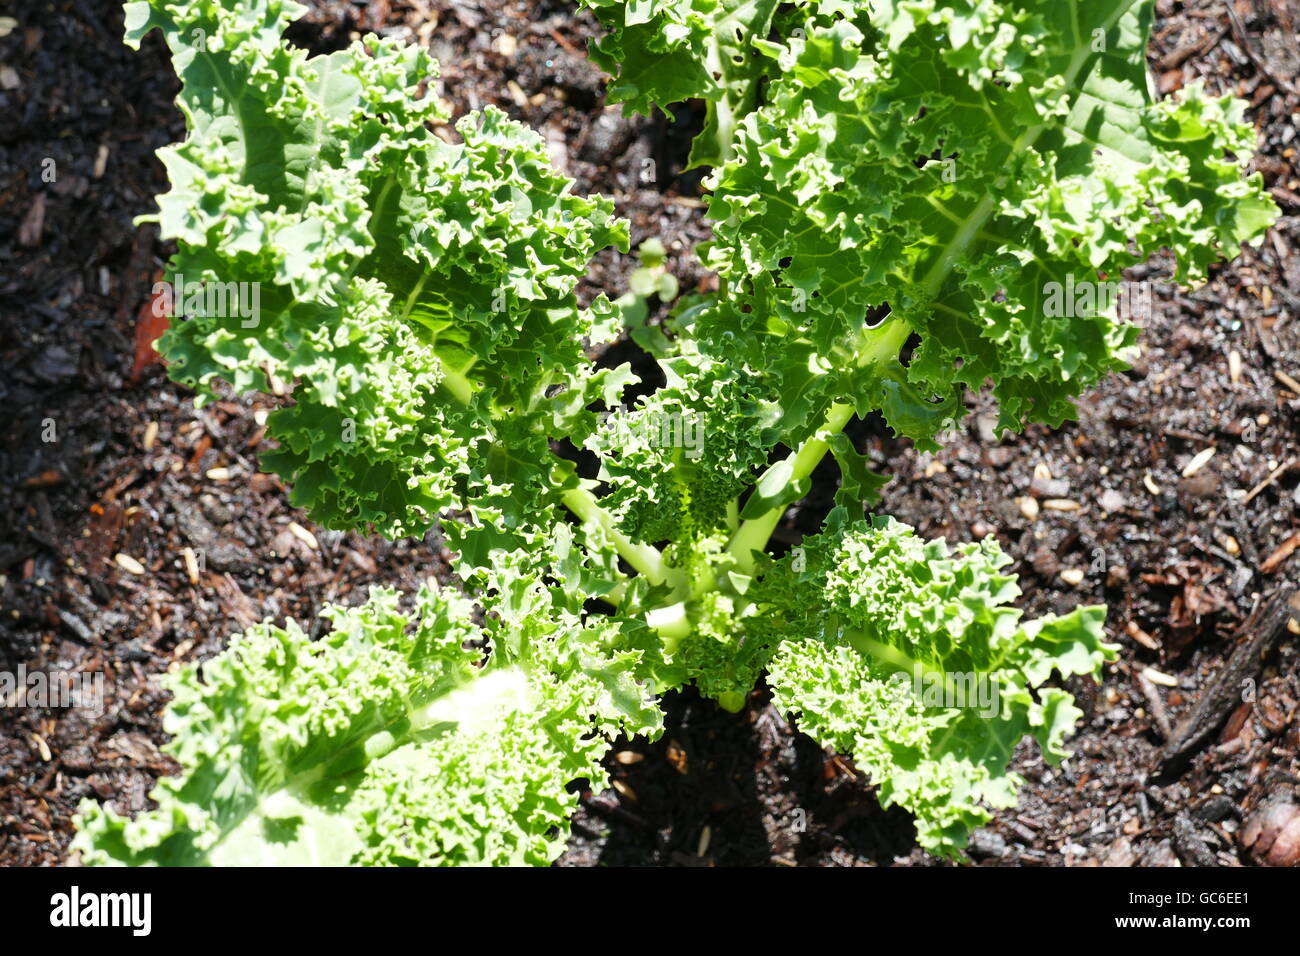 Growing kale in farm garden at Los Angeles Stock Photo